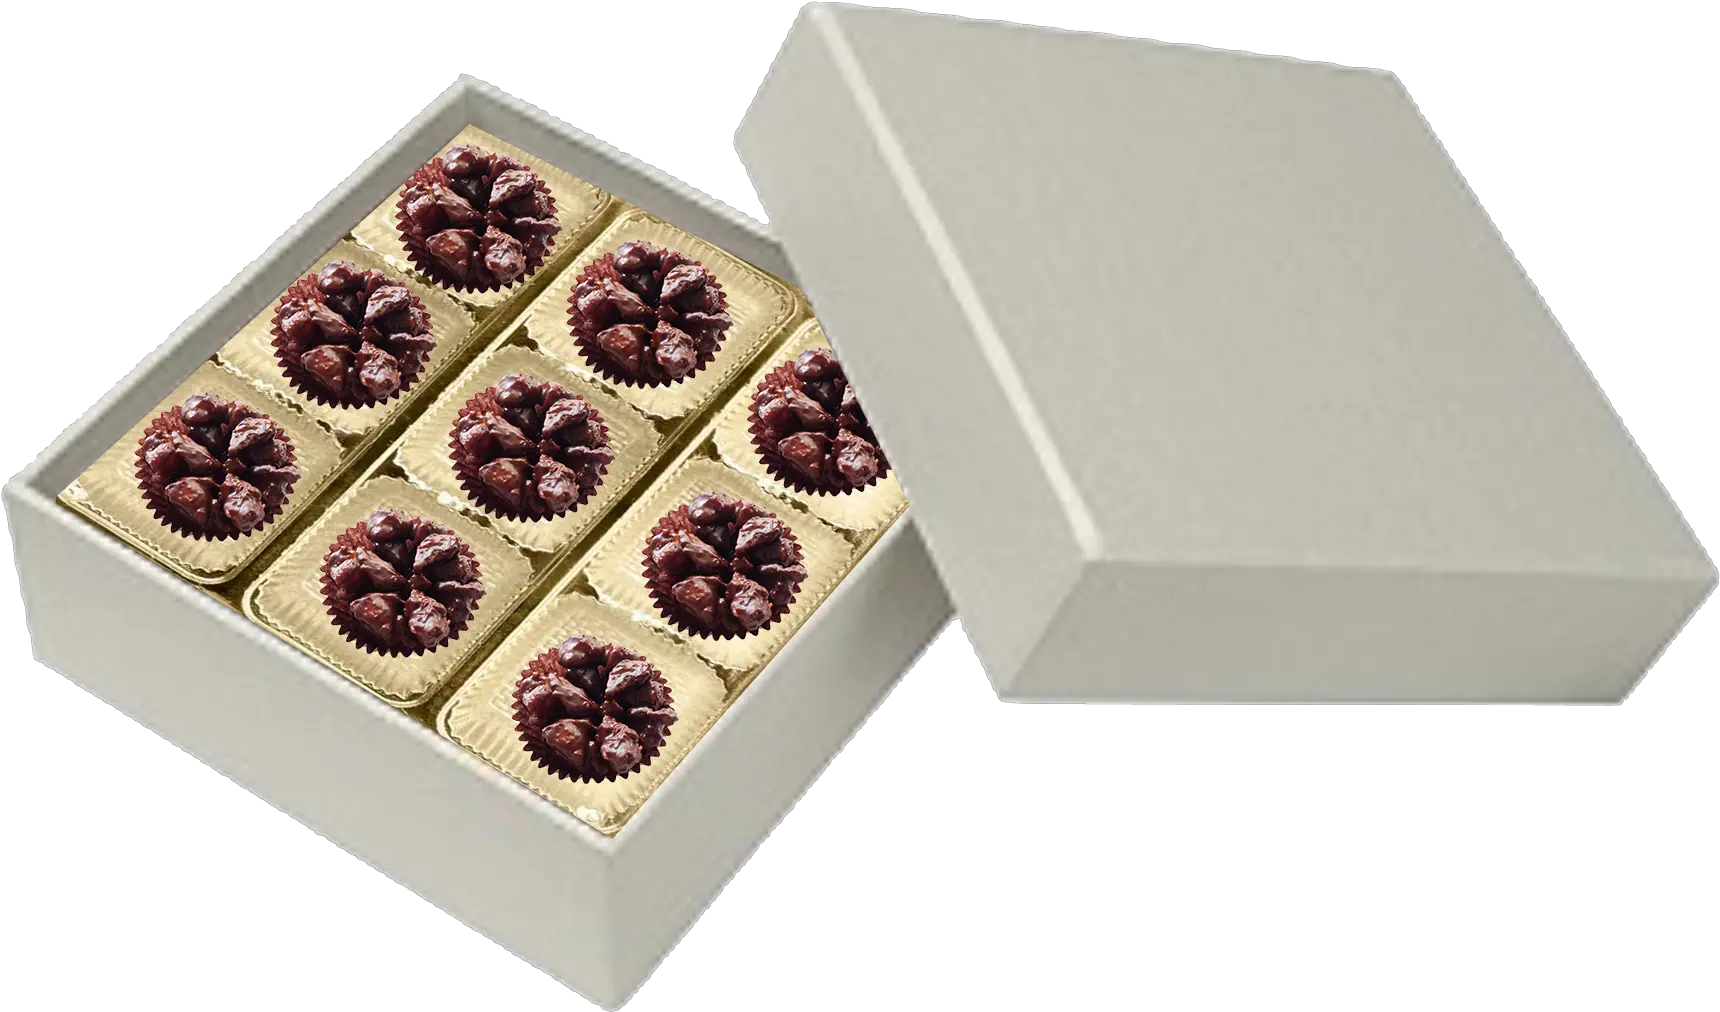 Download Hd Square Pearl 9 Piece Of Macadamia Nuts Lava Rock Giri Choco Png Lava Png